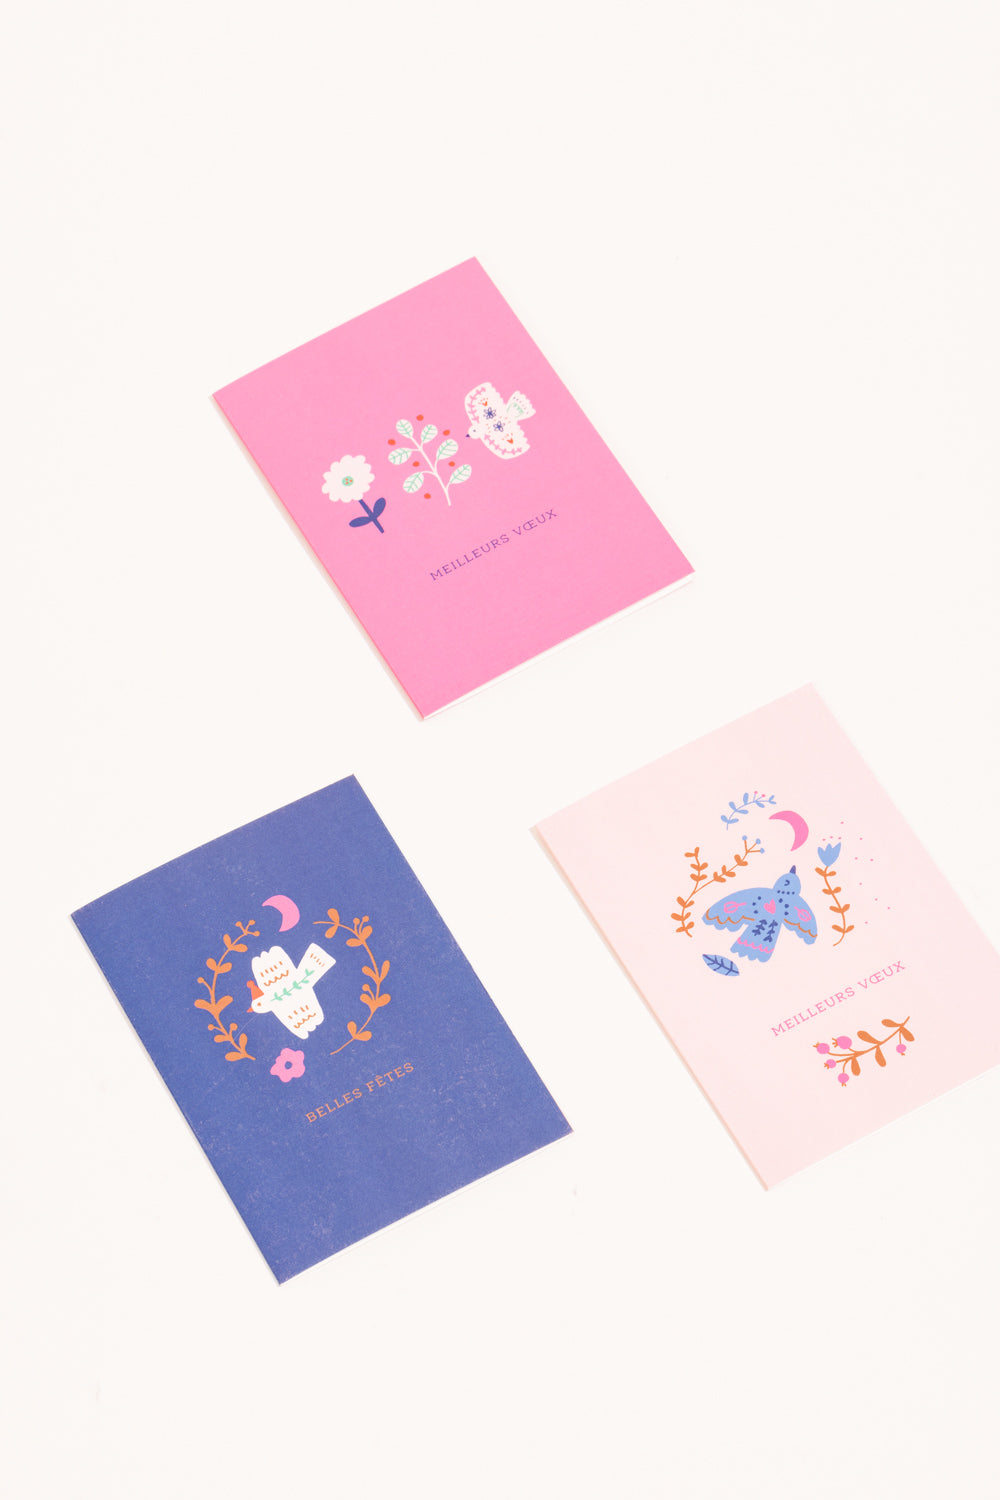 Set of 3 greeting cards